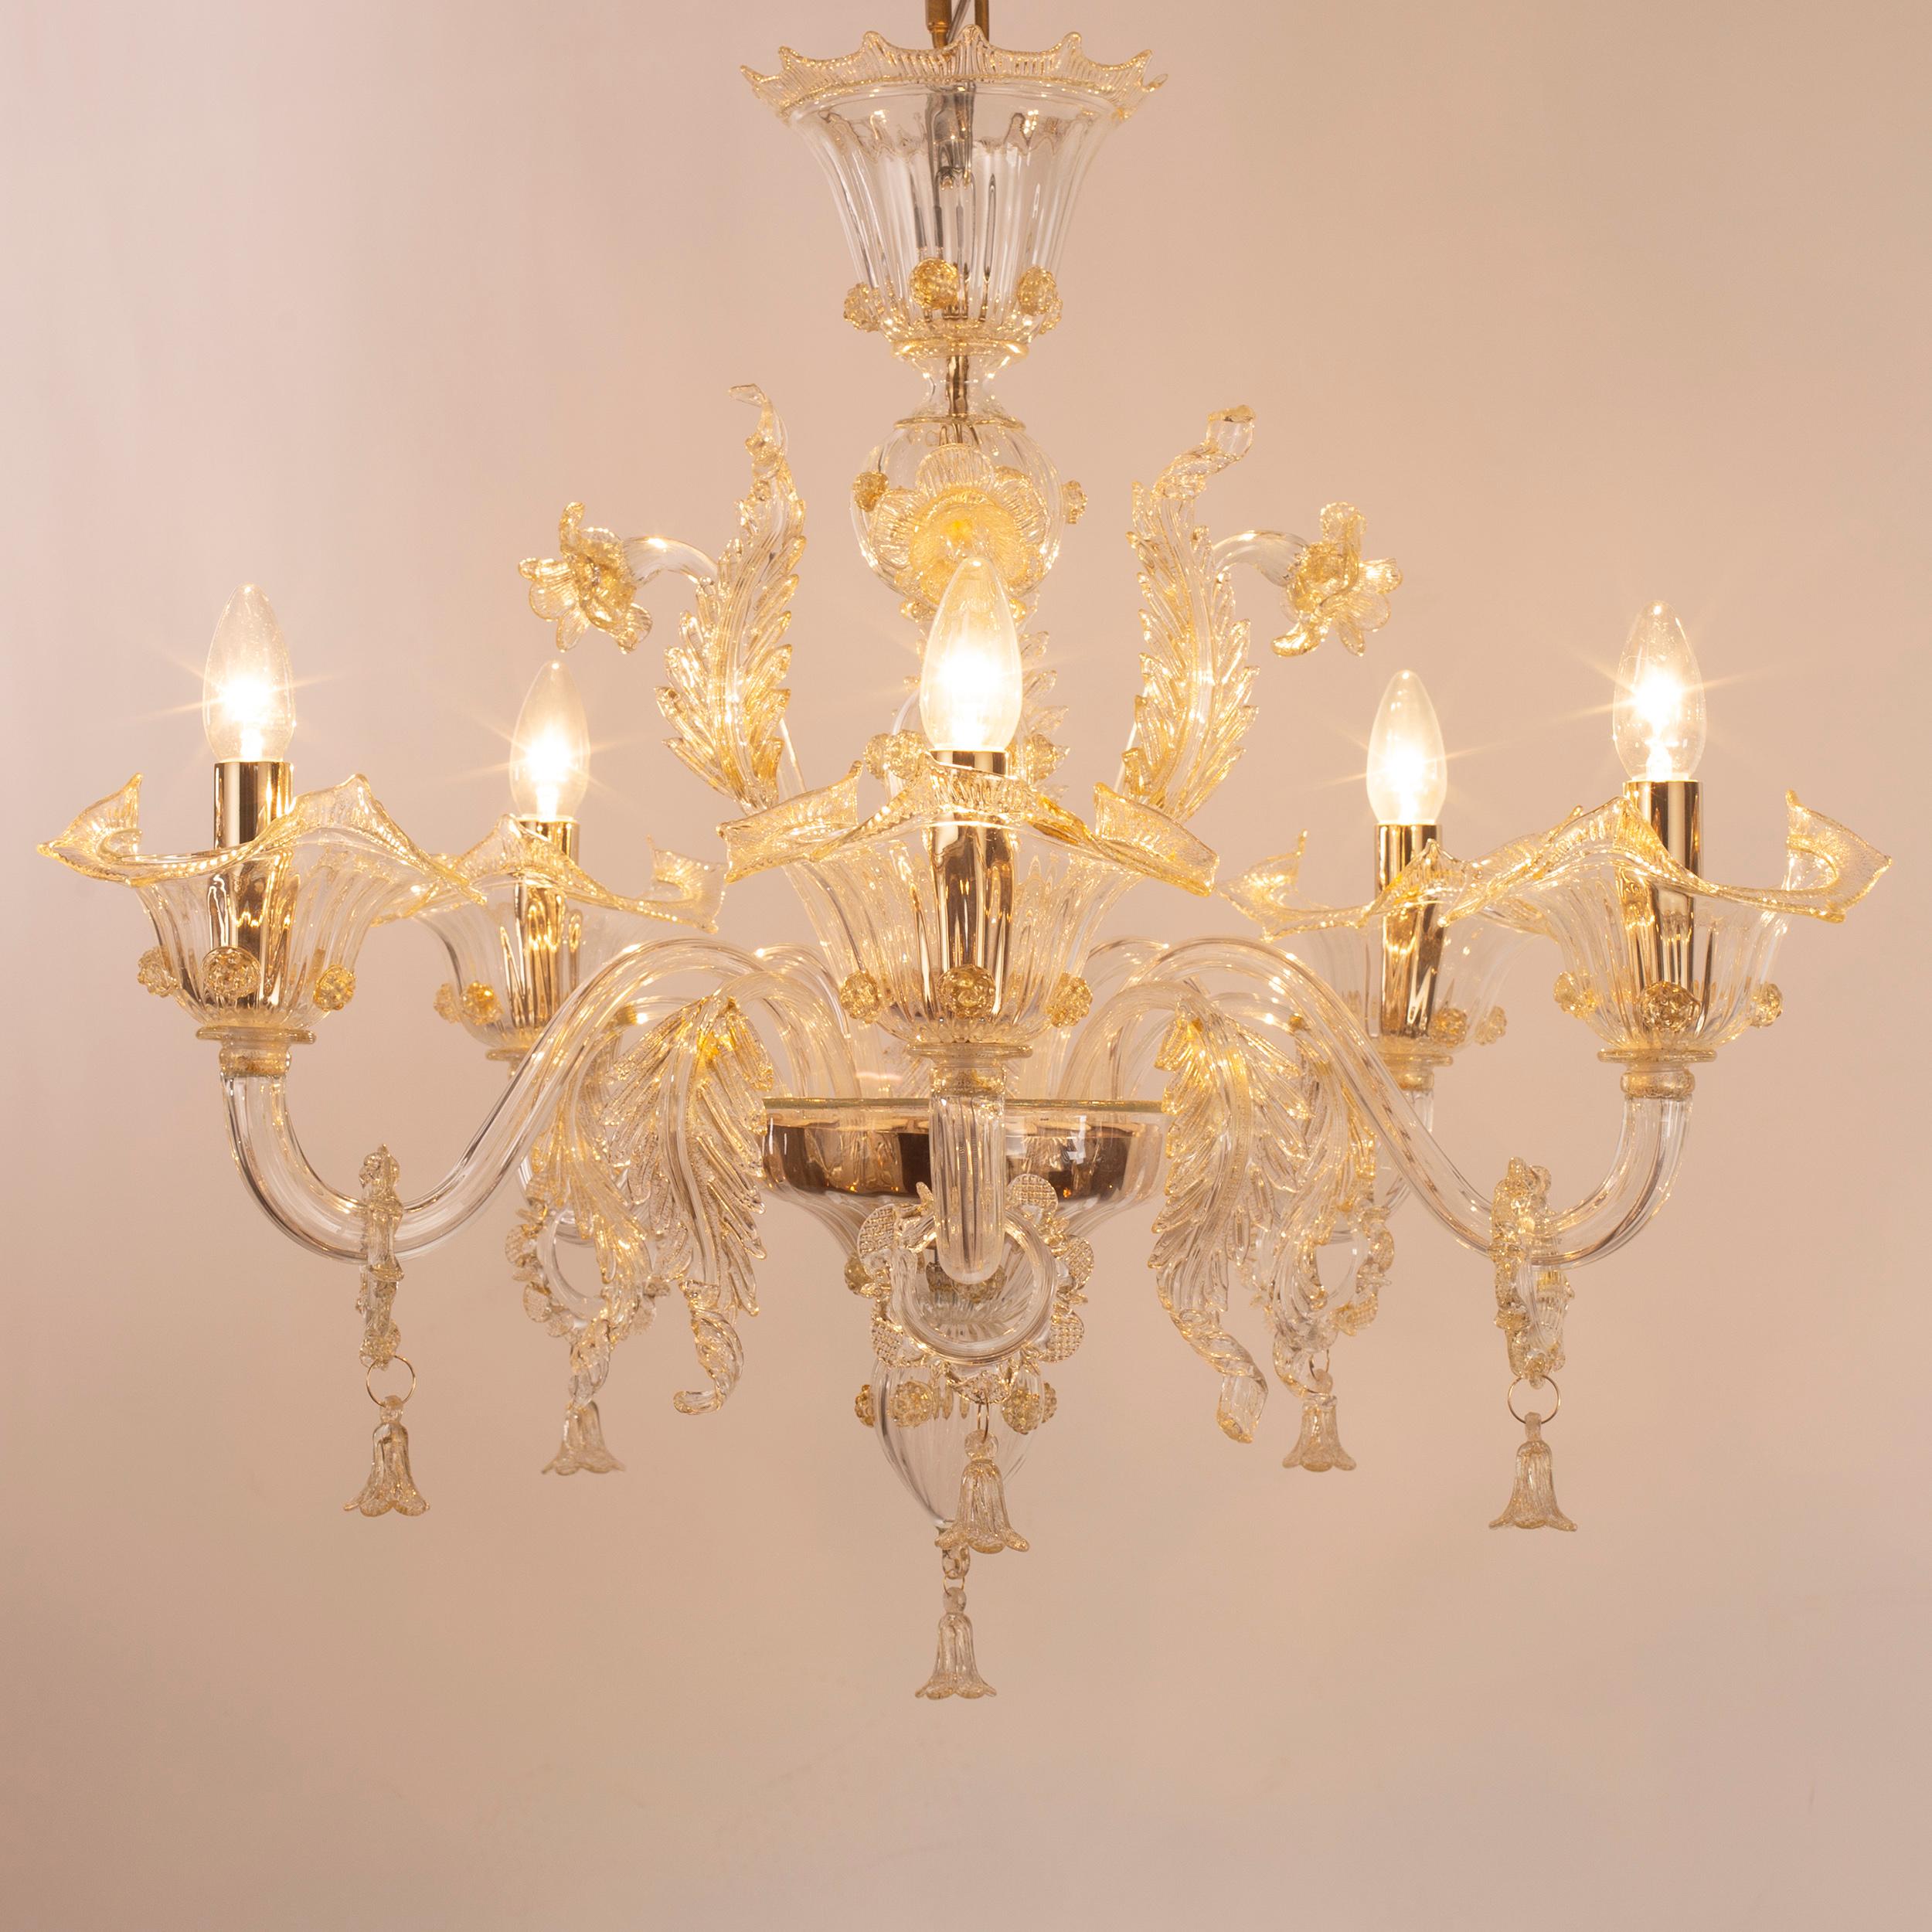 Bovary chandelier, 5 lights, in clear artistic glass, with golden details by Multiforme is a luxury chandelier that will never be outmoded.
This collection takes inspiration from the Classic floral Venetian chandeliers, and it is available in many